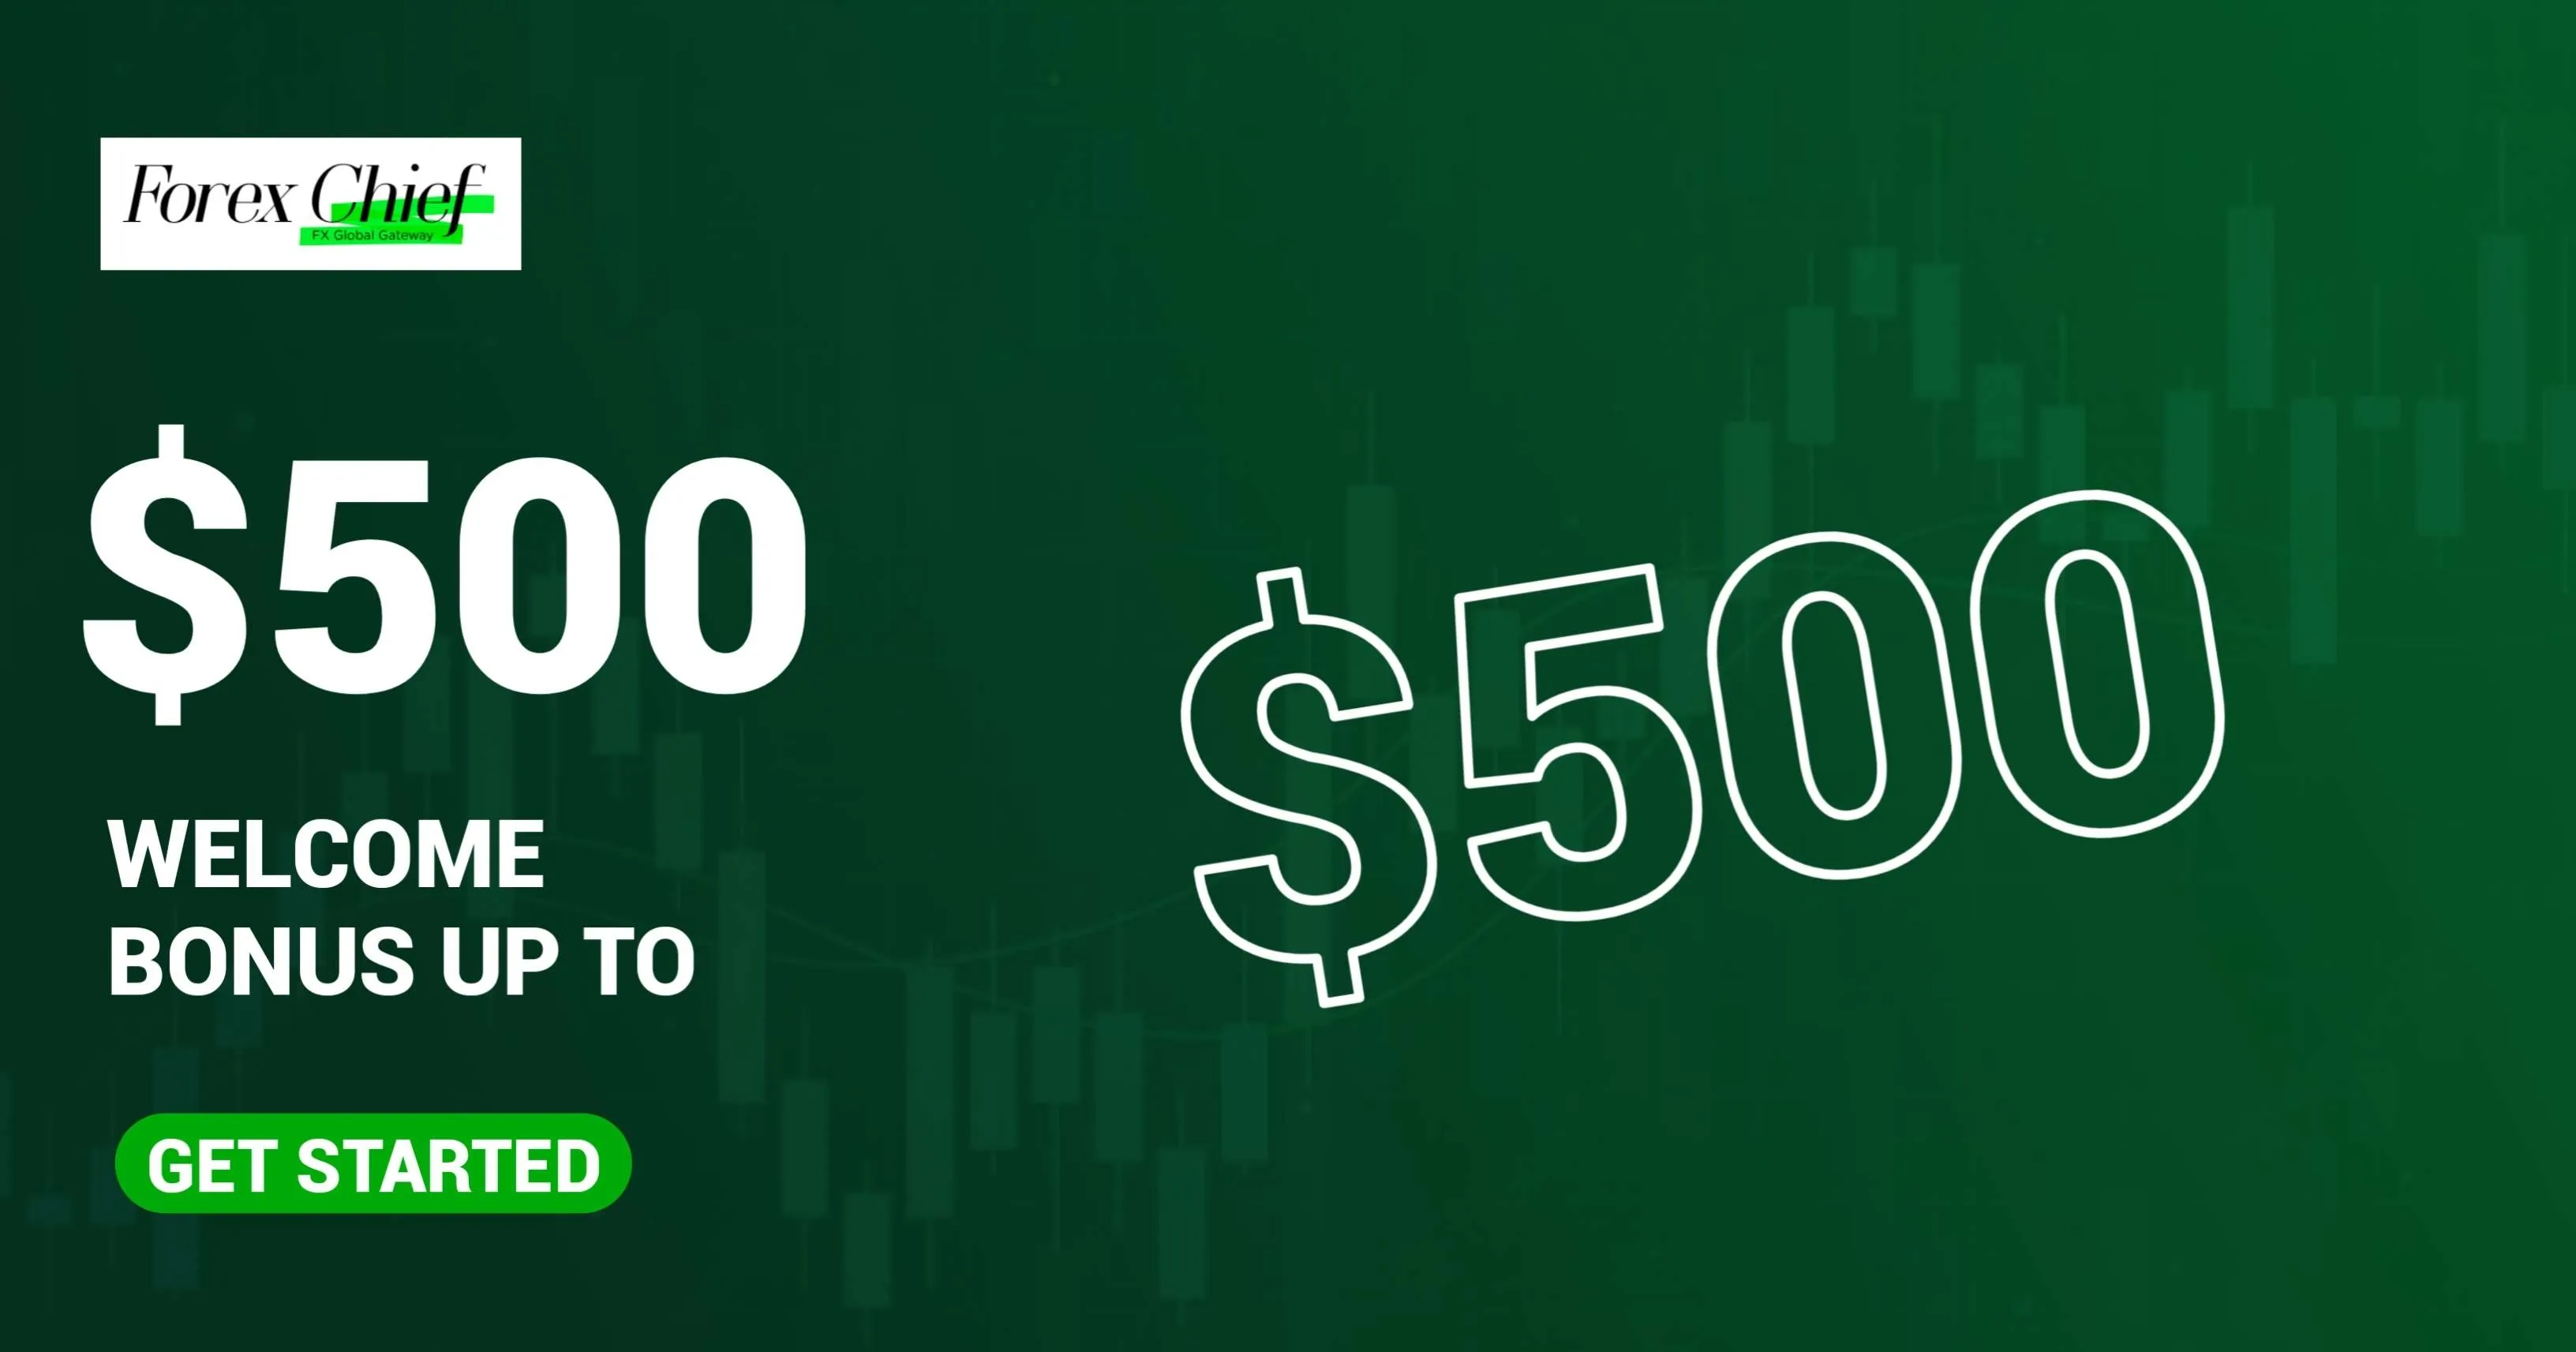 Grab  Welcome Bonus up to $500 - ForexChief